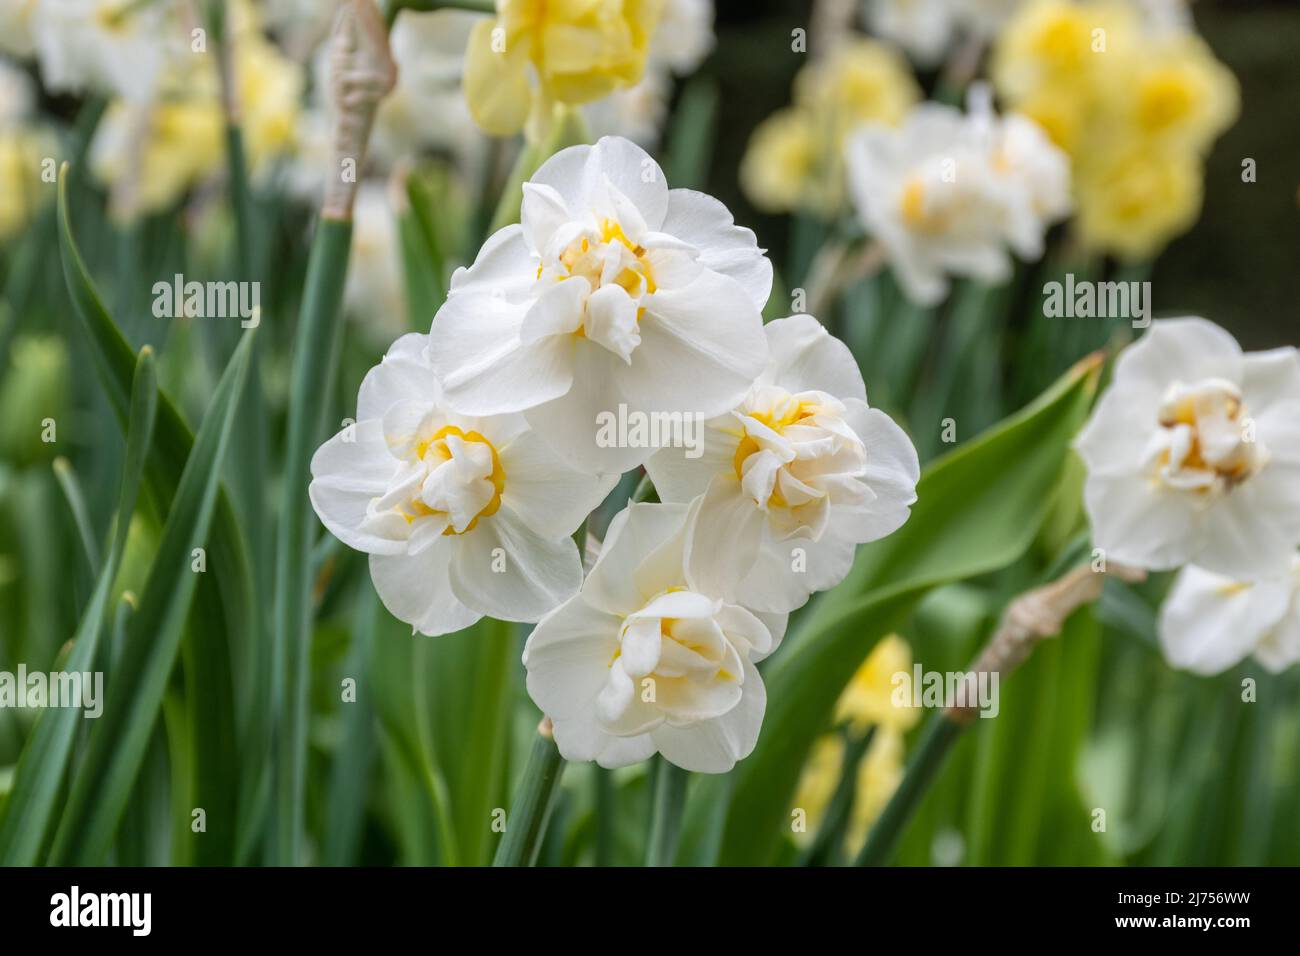 Narcissus 'Cheerfulness', late flowering creamy-white daffodil with clusters of flowers Stock Photo